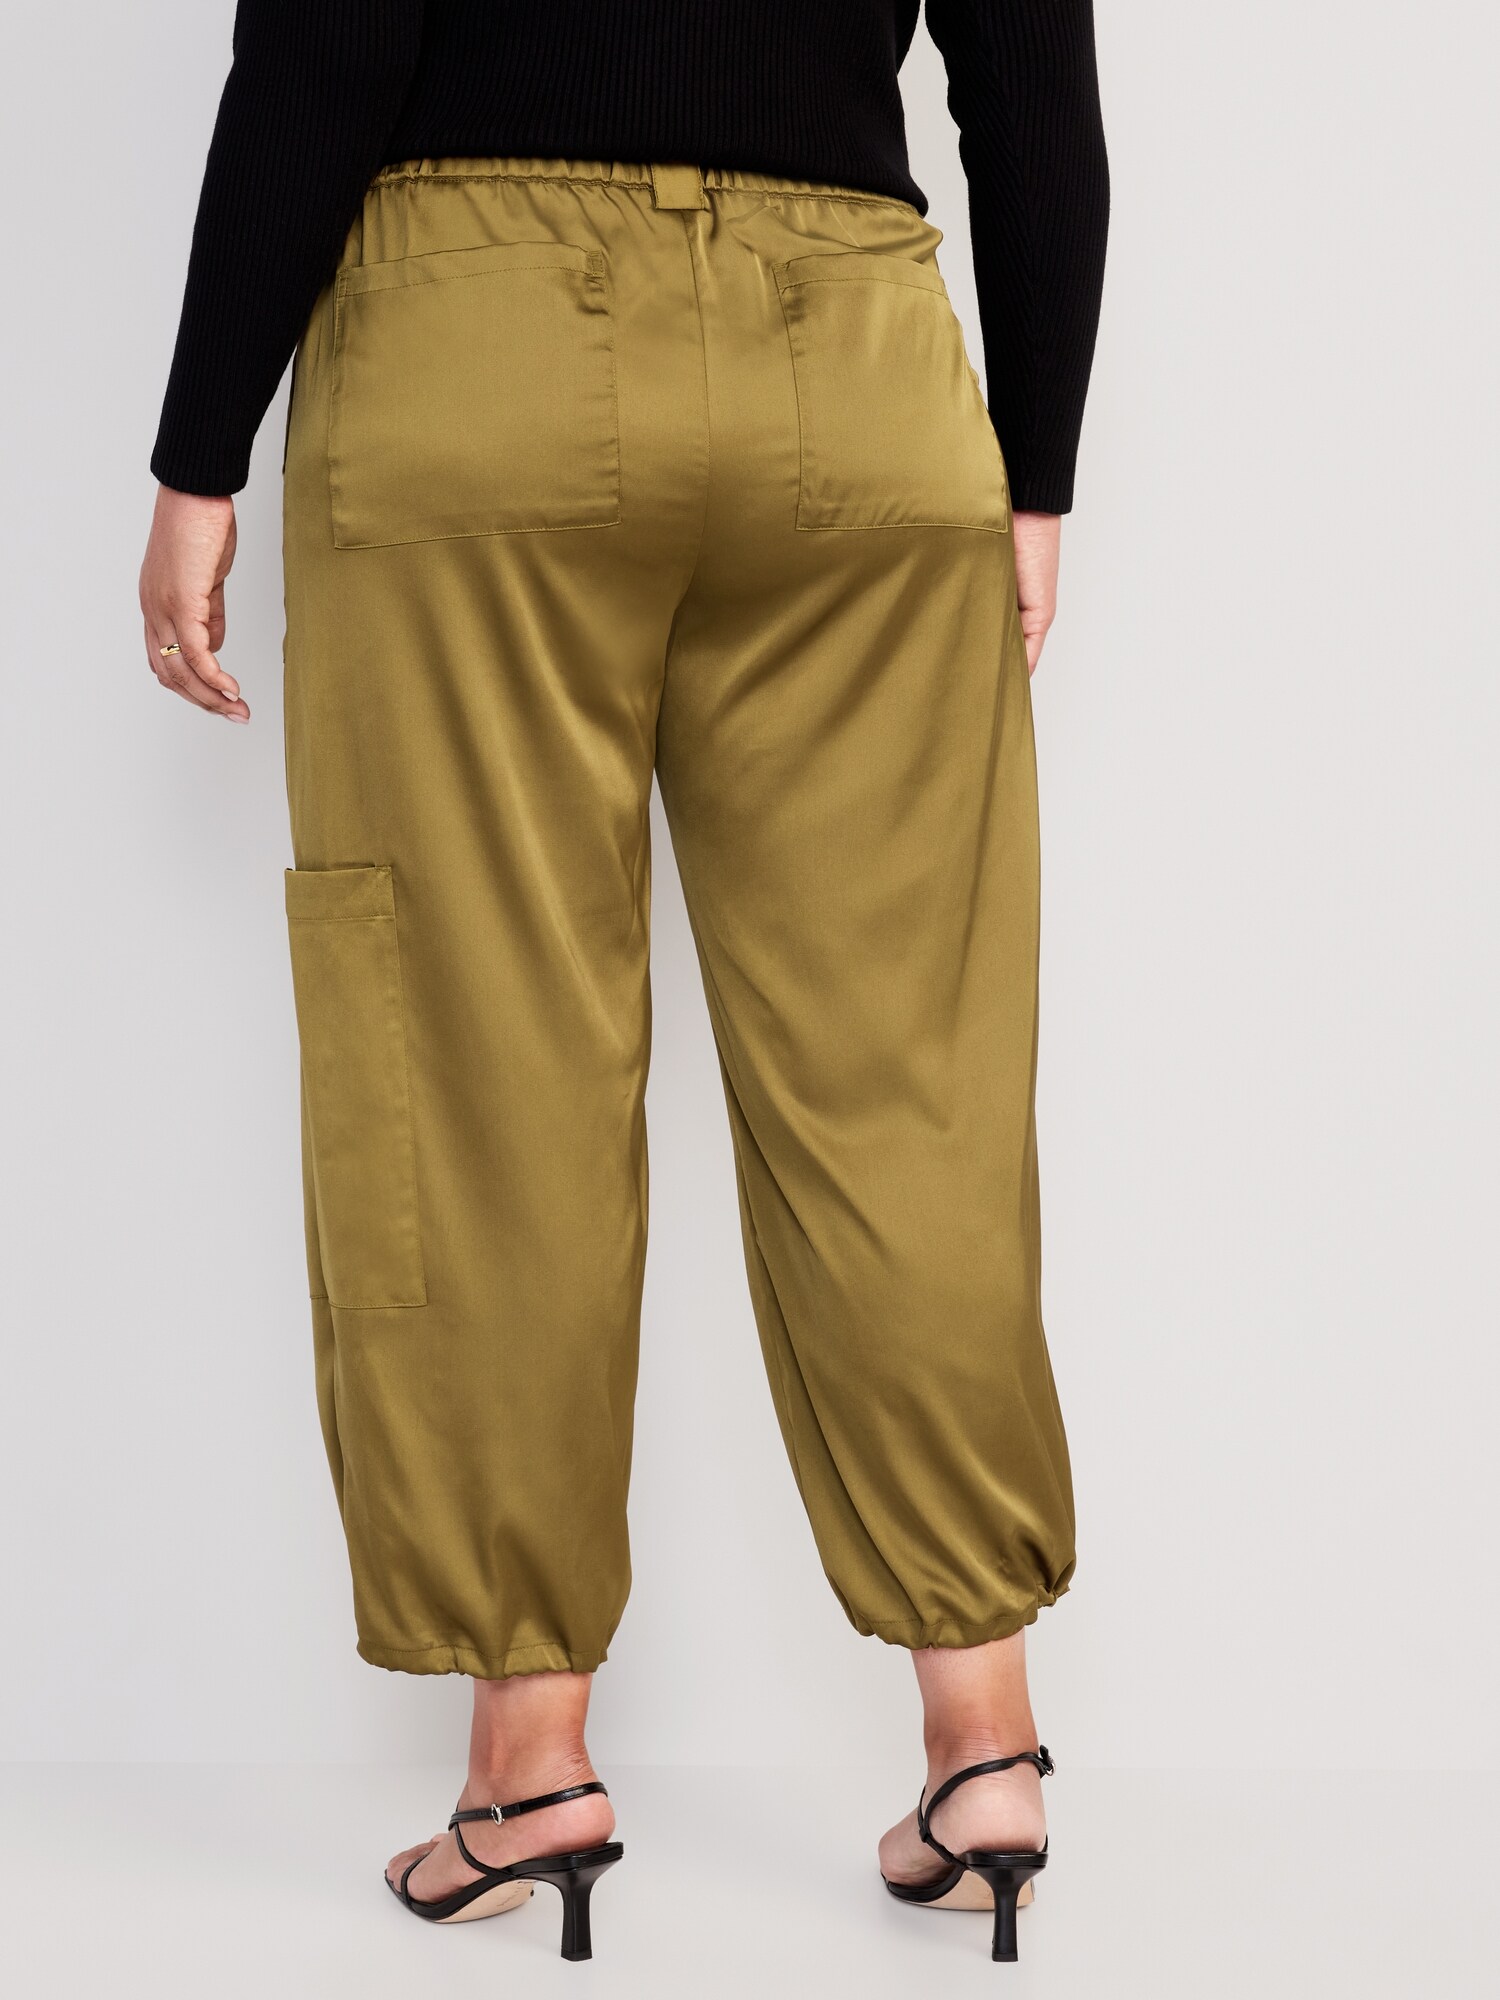 WOMEN'S HIGH-RISE SATIN Cargo Pants - A New Day $16.99 - PicClick